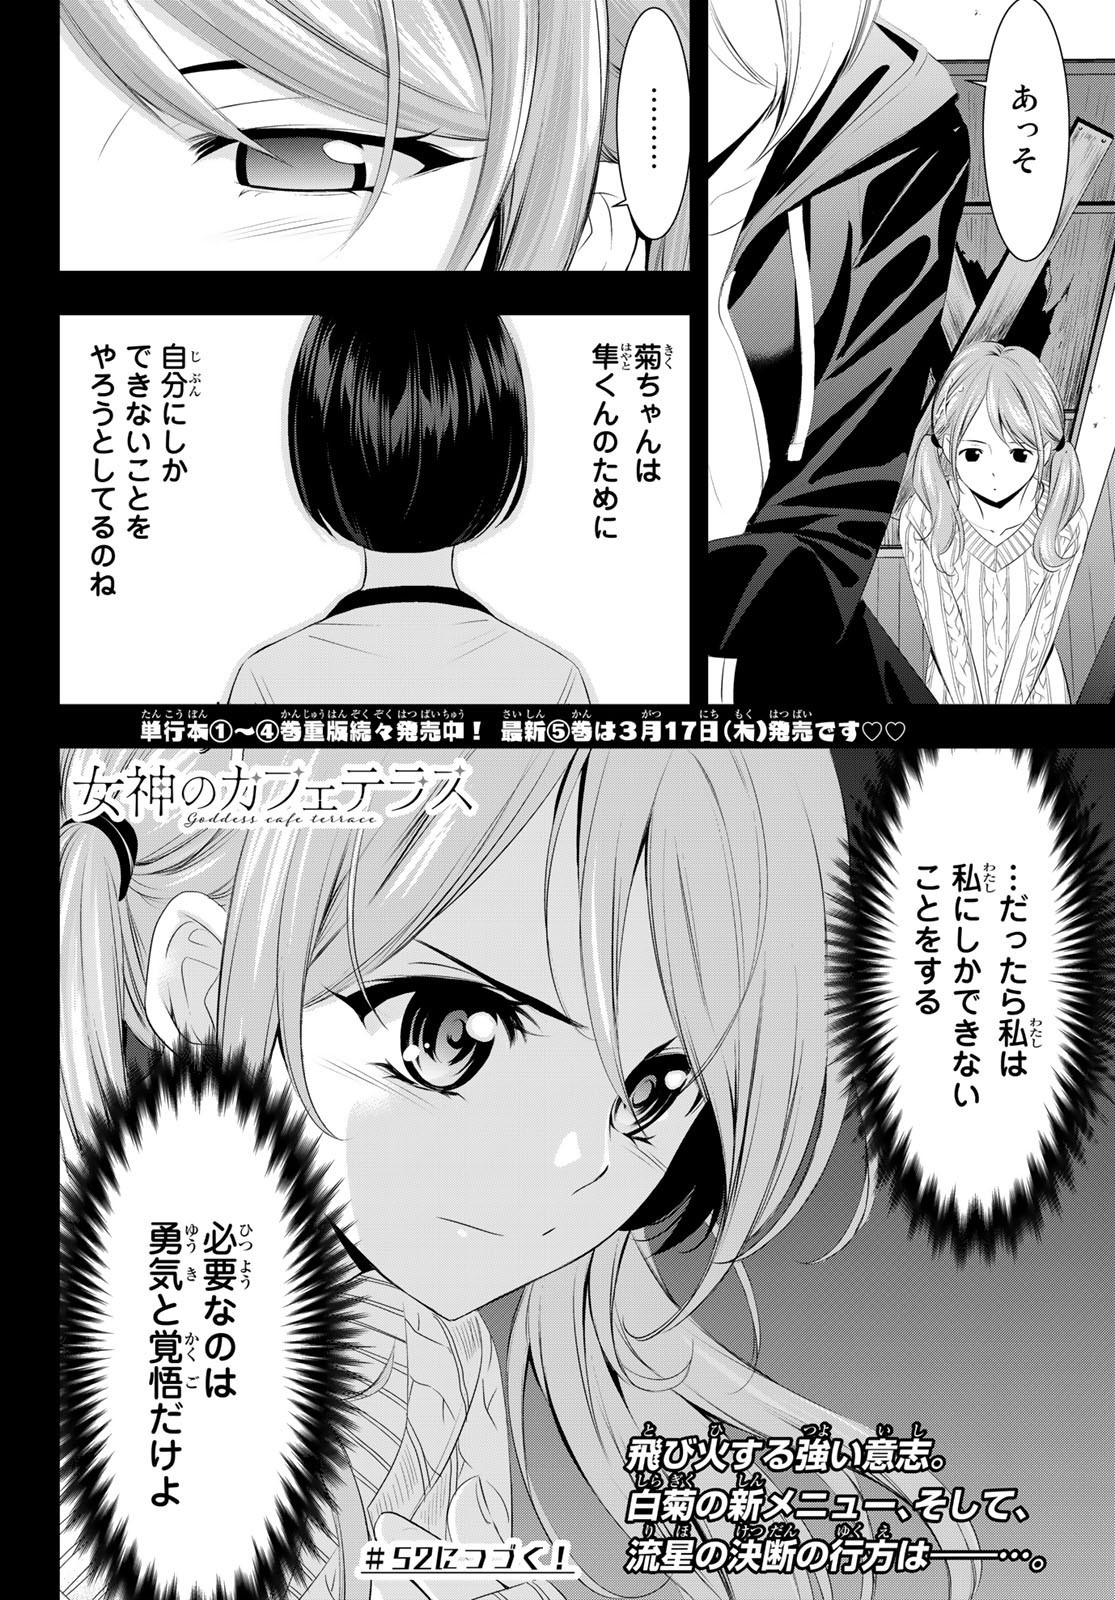 Goddess-Cafe-Terrace - Chapter 051 - Page 19